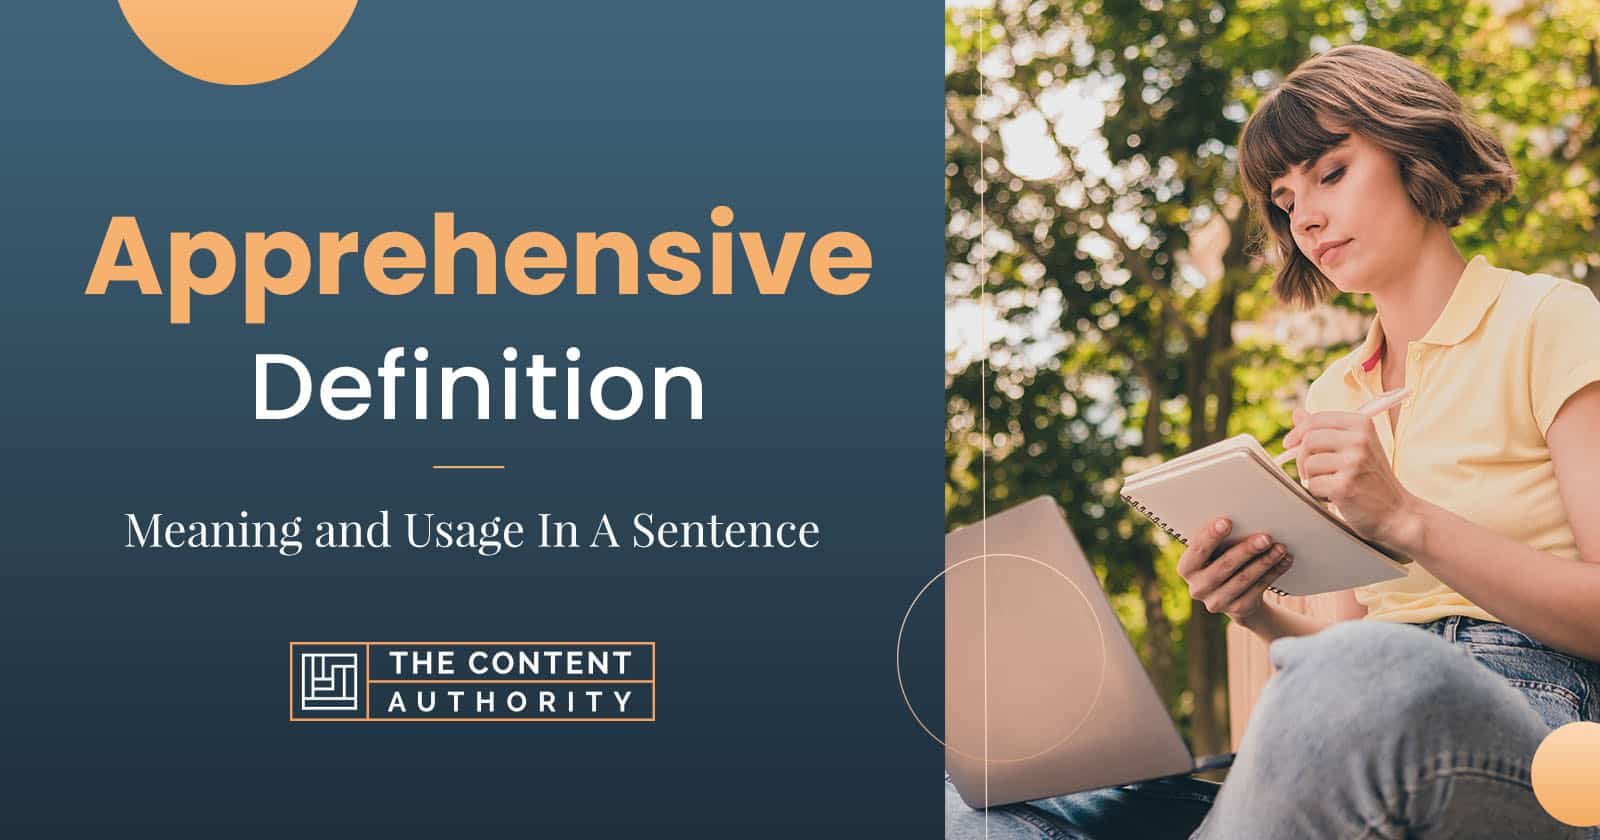 Apprehensive Definition – Meaning and Usage in a Sentence